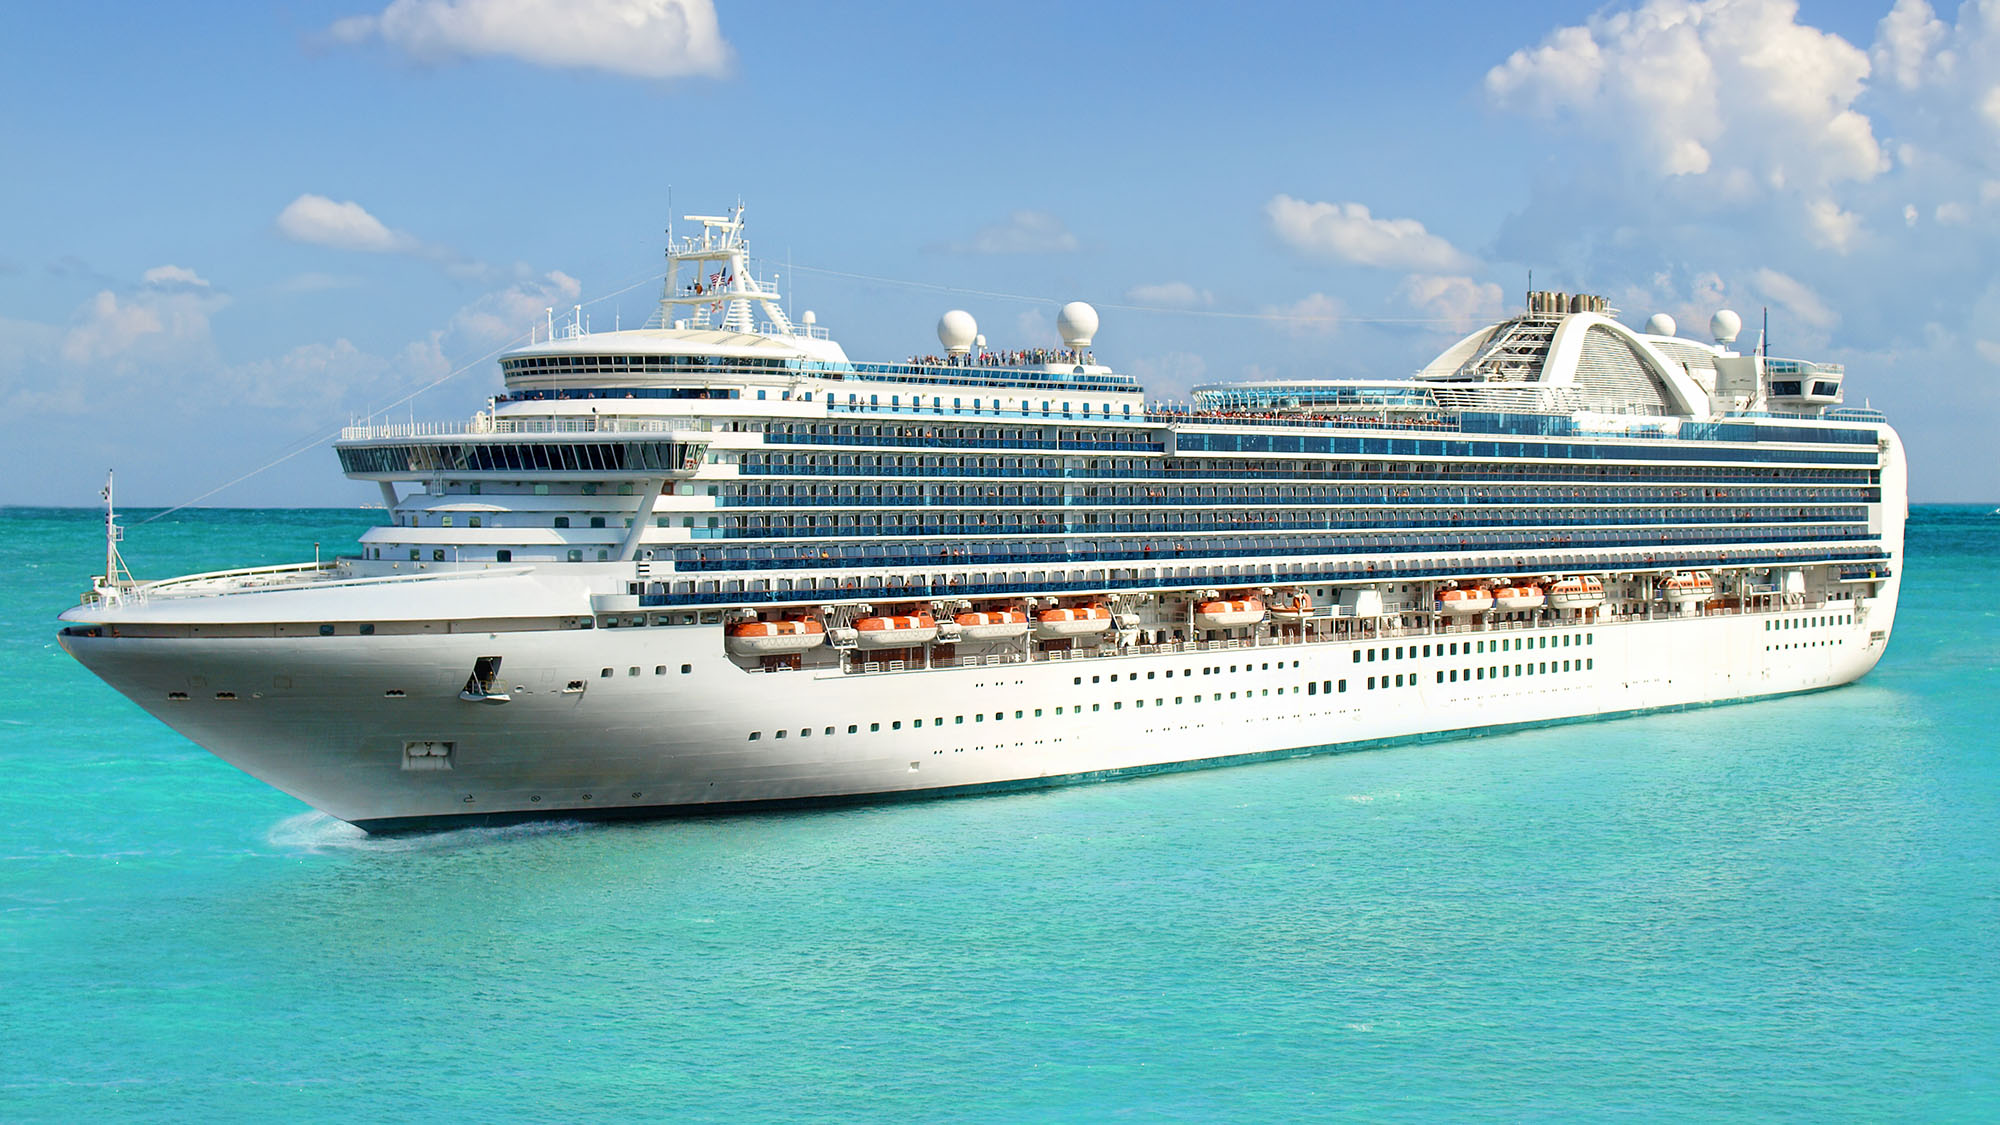 3 ways to save BIG on your next cruise